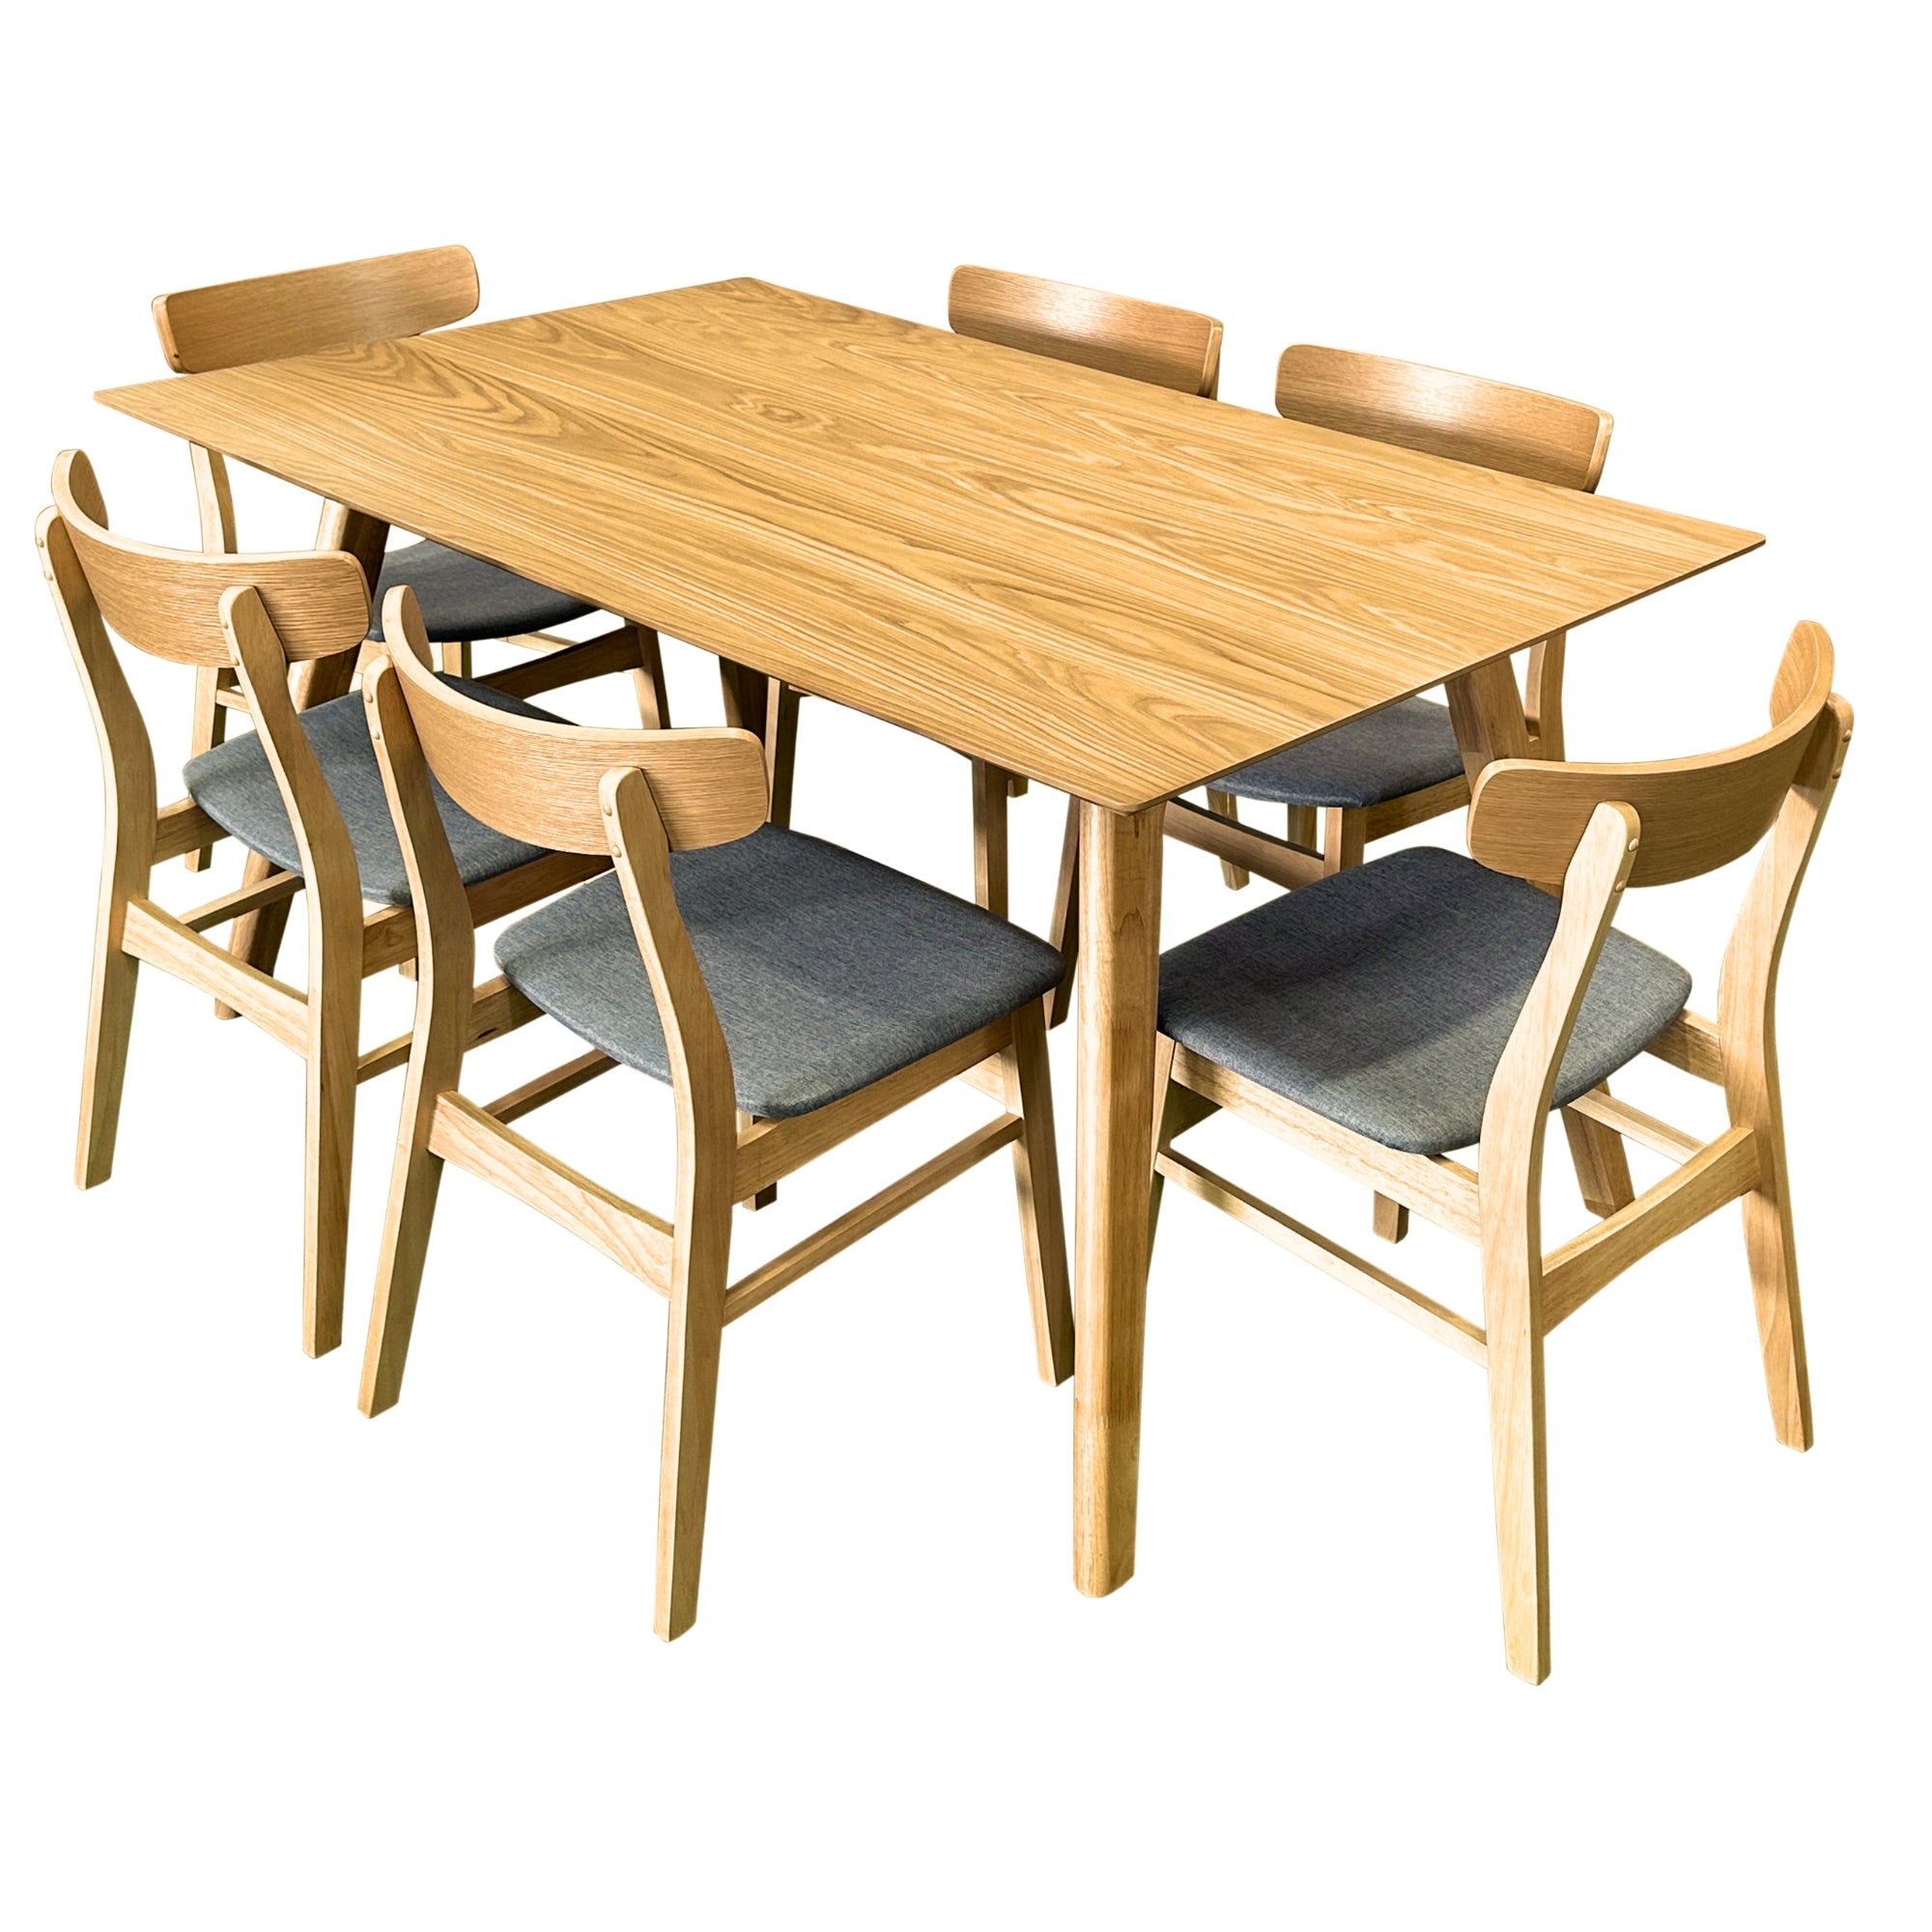 7pc Natural Oak Dining Set, Solid Wood, Fabric Chairs